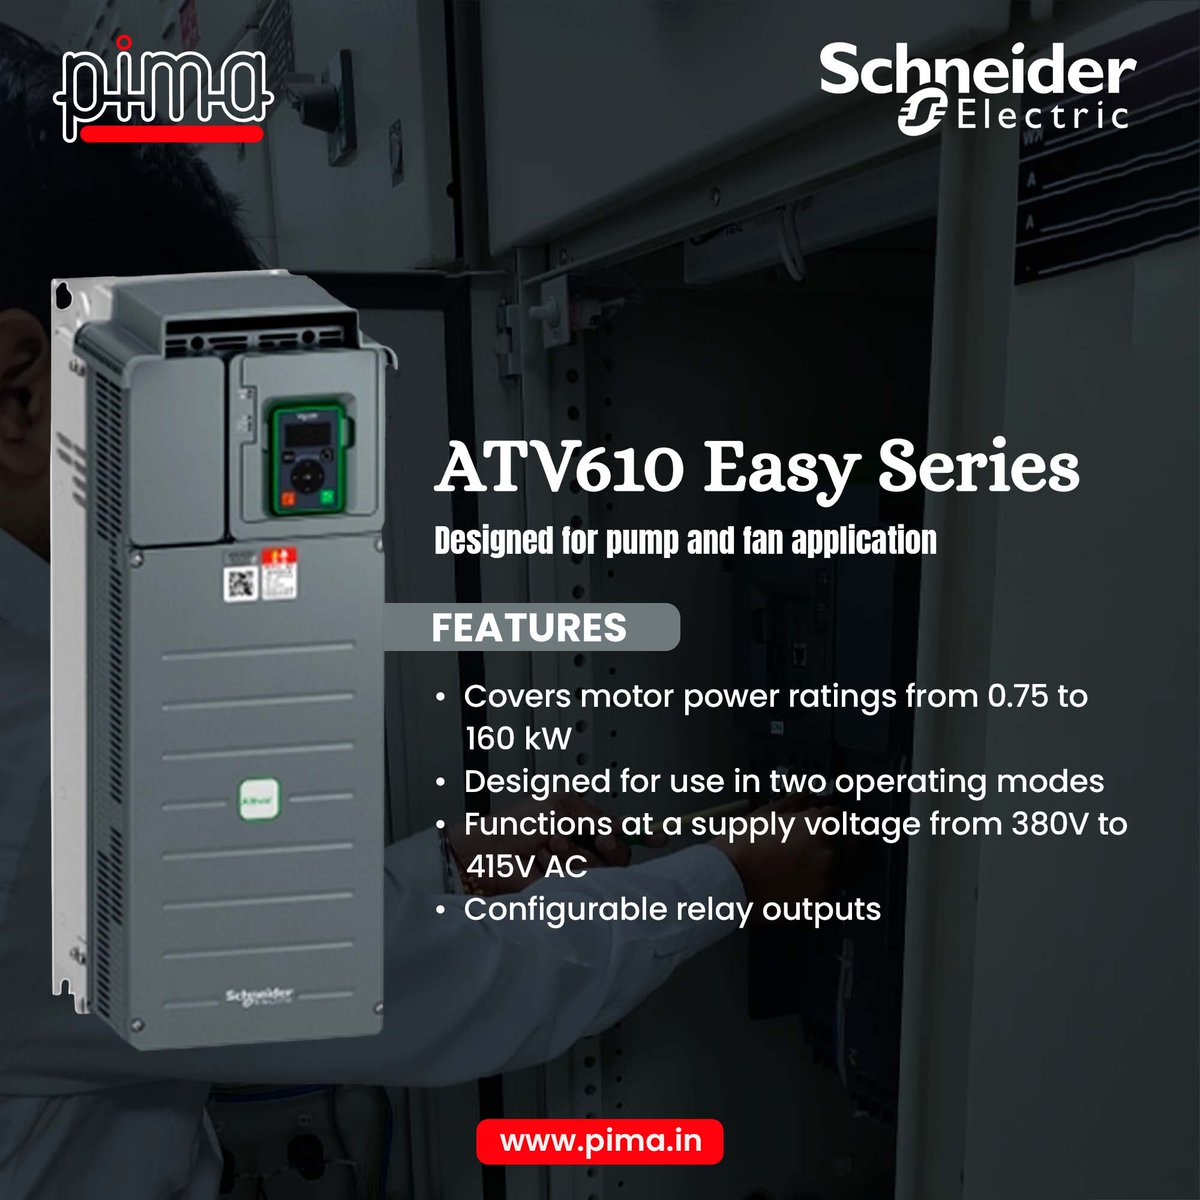 These 2 operating modes make the Easy Altivar 610 range suitable for use in variable and constant torque applications, such as pump, fan, compressor, and conveyor.

Visit our website at pima.in.

#EasyAltivar610 #VariableSpeedDrives #OptimizeDriveNominalRating